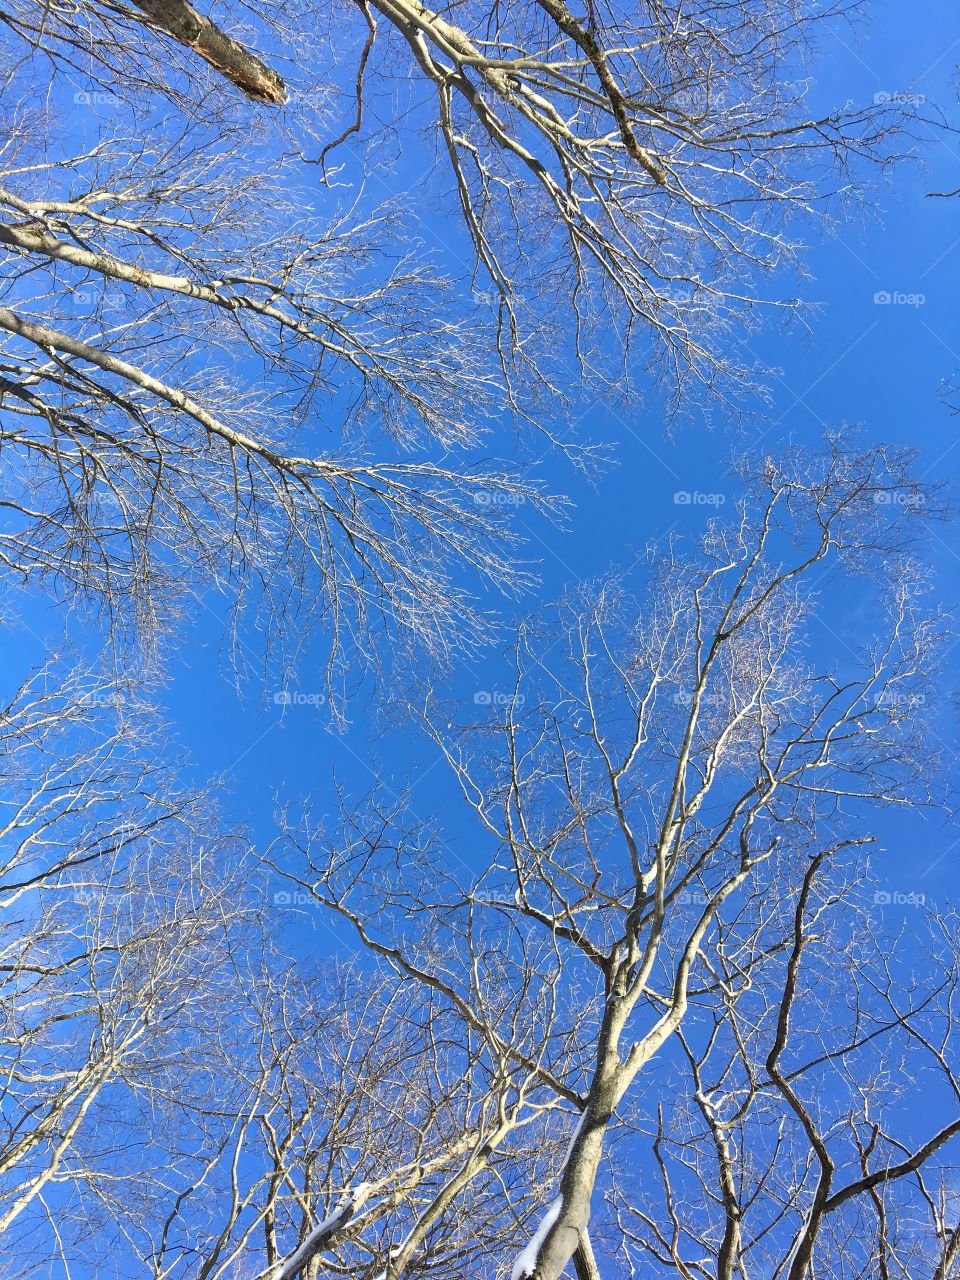 Winter-bare trees against a bright blue sky